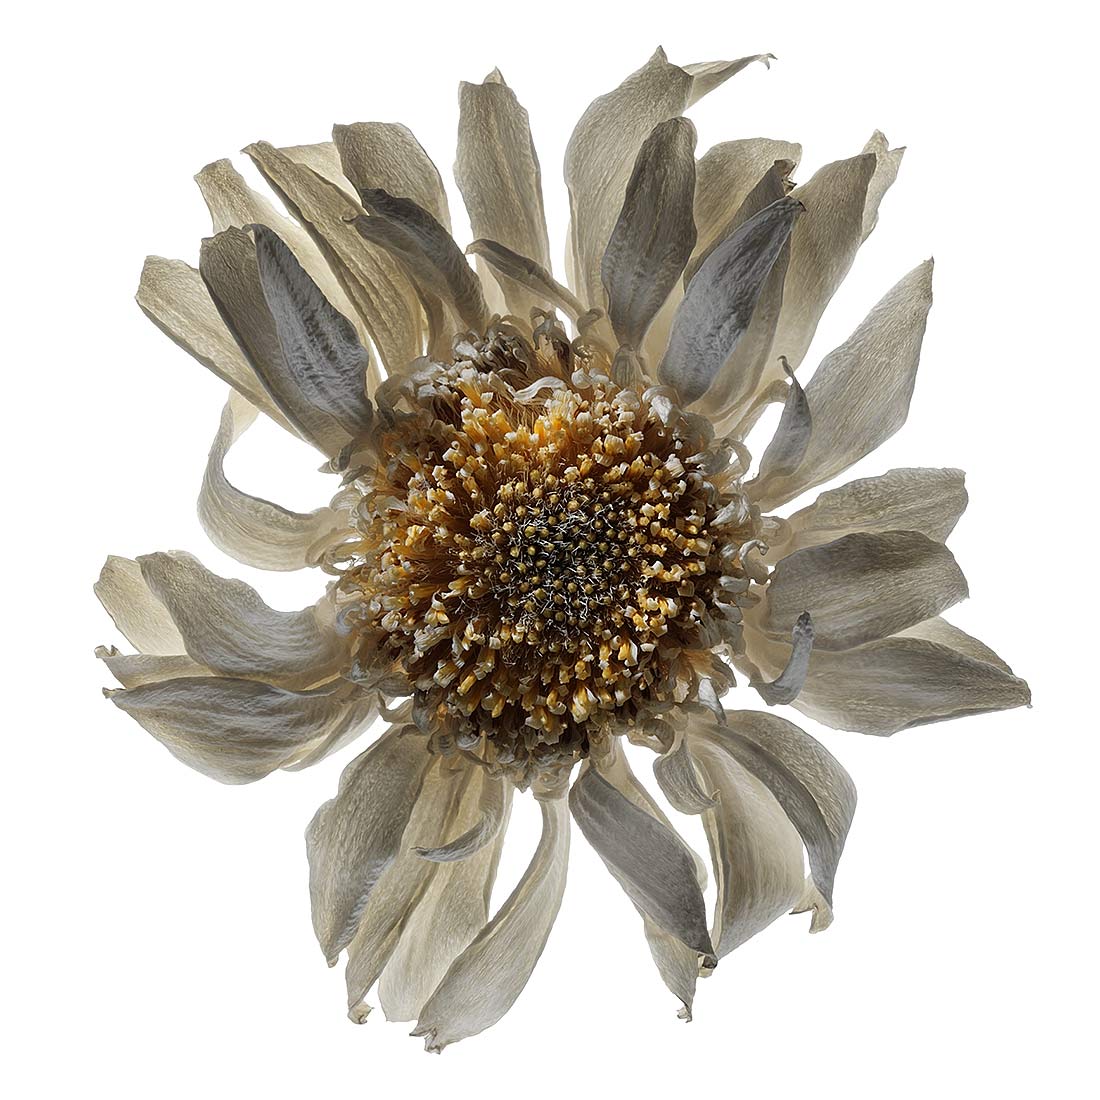 EXPERIMENTAL-PHOTOGRAPHY-ZACK-BURRIS-CHICAGO-DRIED-WHITE-FLOWER-S